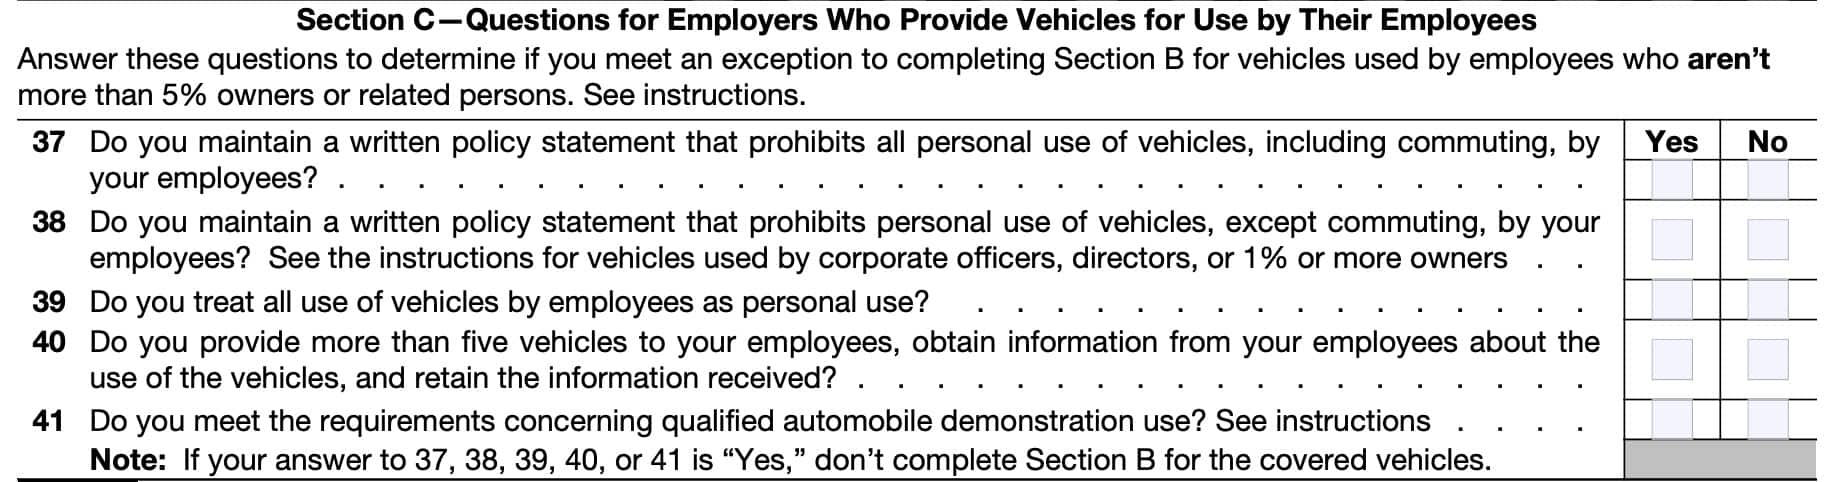 Part v section c: questions for employers who provide vehicles for use by employees